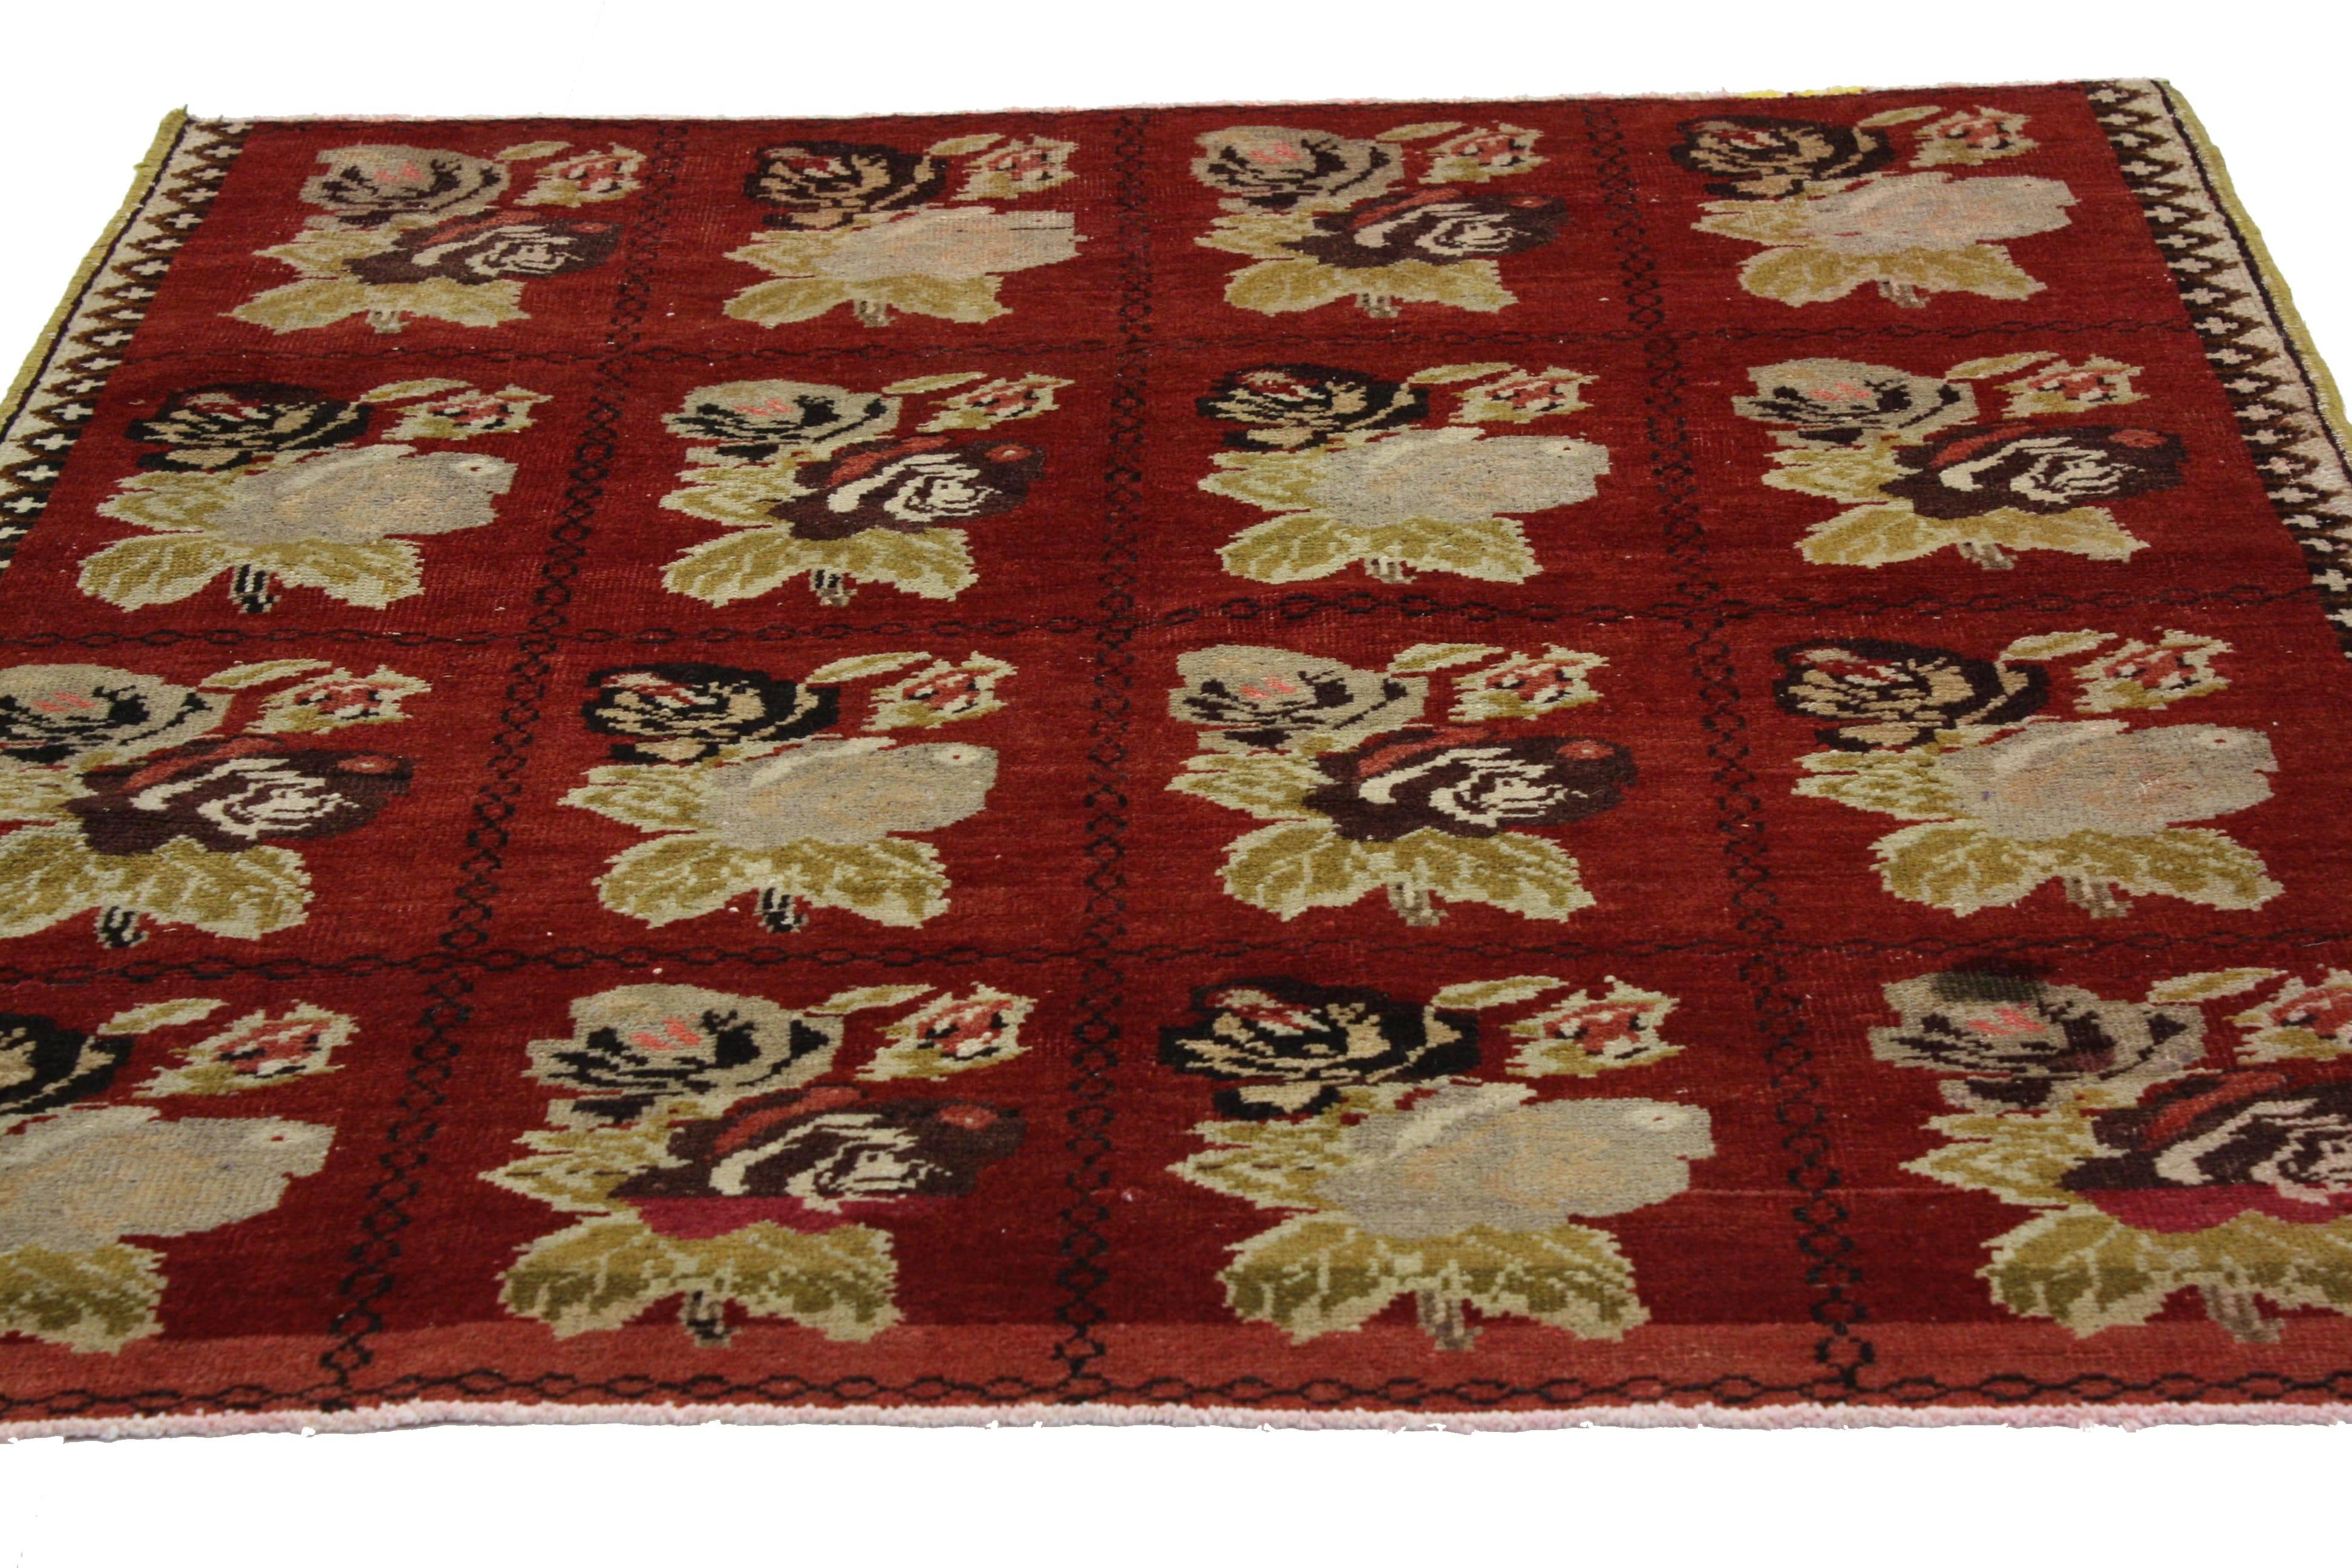 51569, vintage Turkish Oushak Accent rug with Farmhouse style. With cabbage rose bouquets set on a deep ruby red backdrop, this vintage Turkish Oushak rug with Farmhouse style will bring charm and whimsy to any corner of your home. Four by four rows